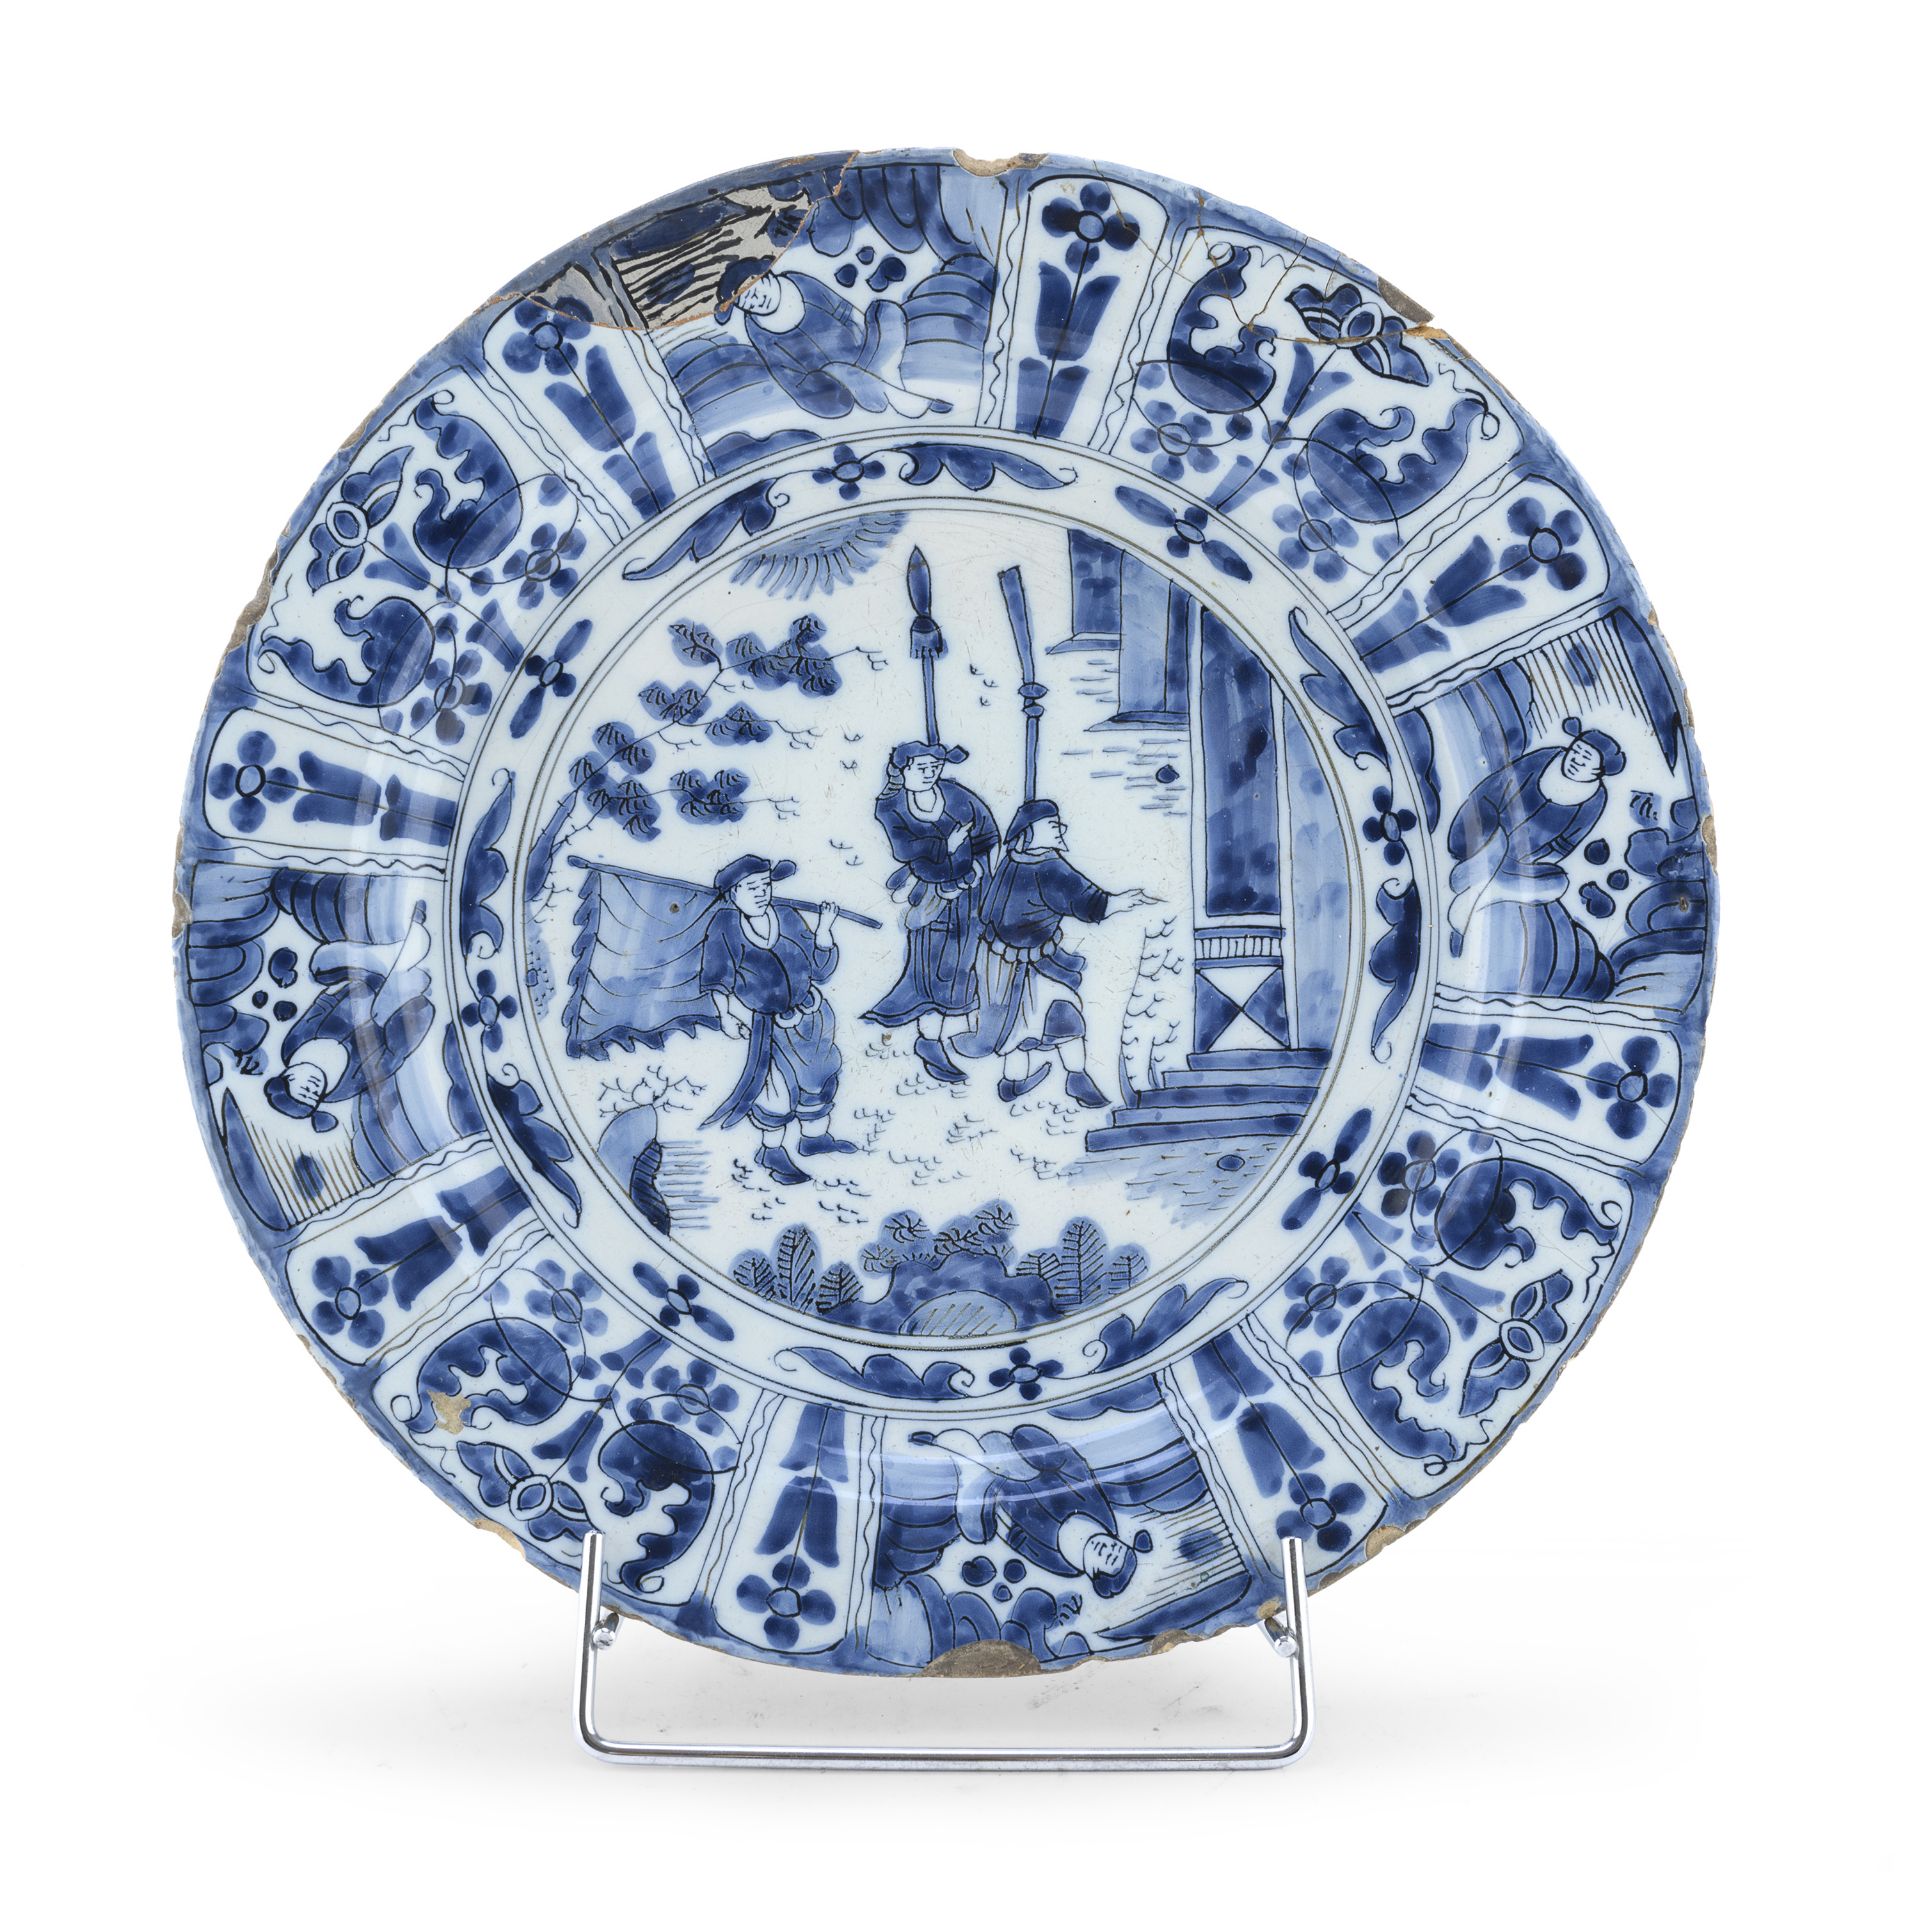 LARGE CERAMIC PLATE WITH WHITE AND BLUE DECORATION DELFT 18TH CENTURY